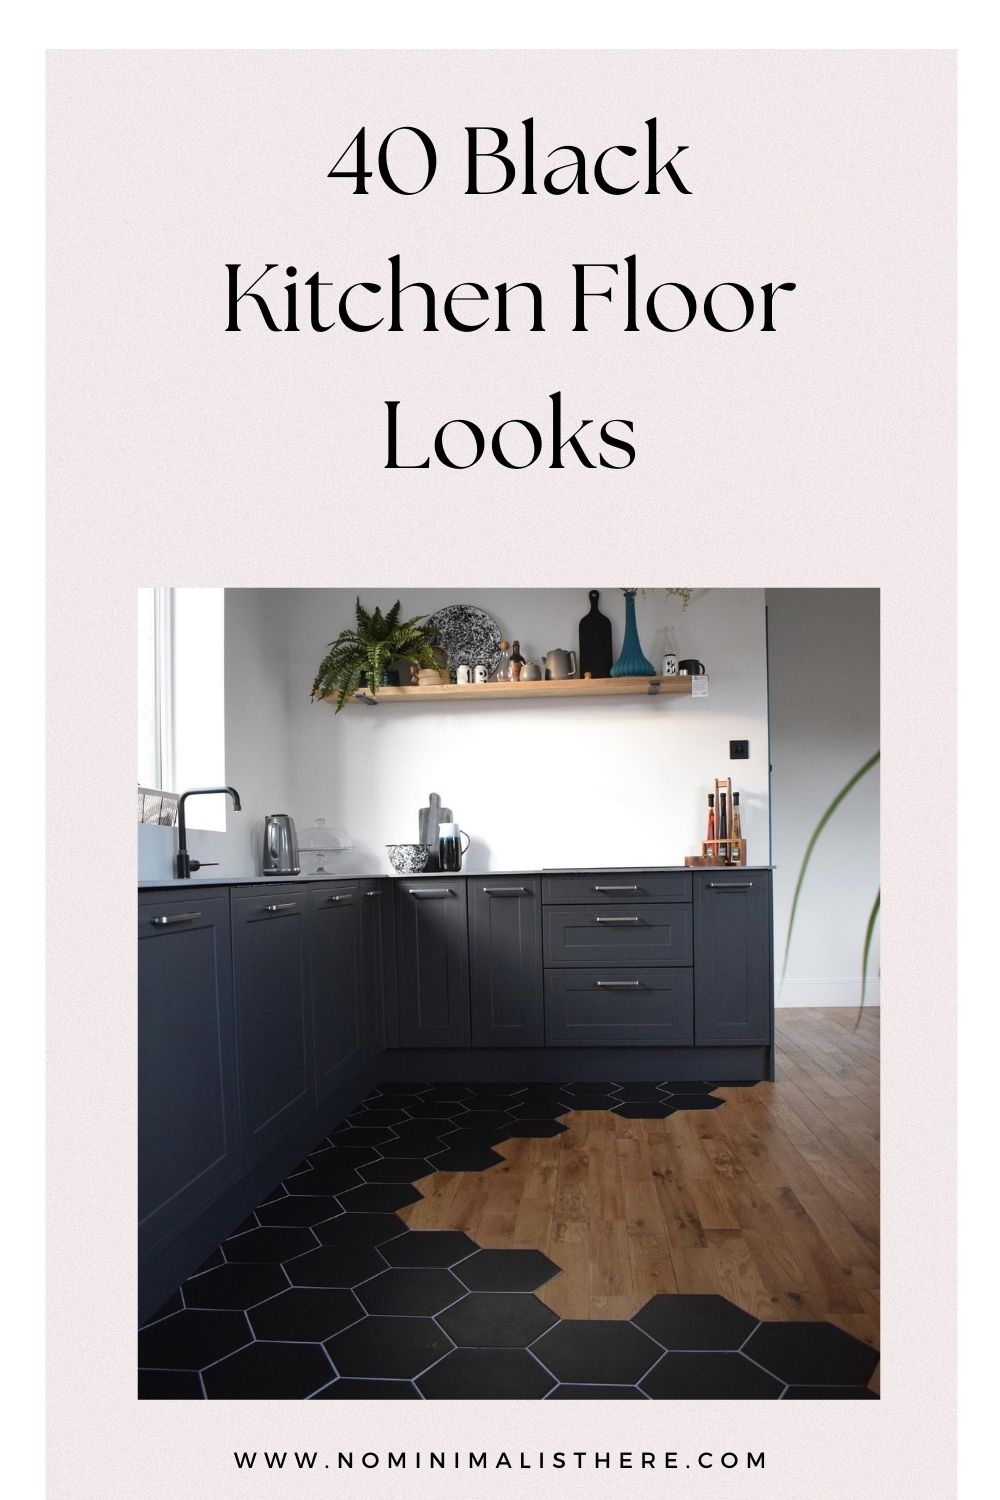 pinterest image for an article about black kitchen floor